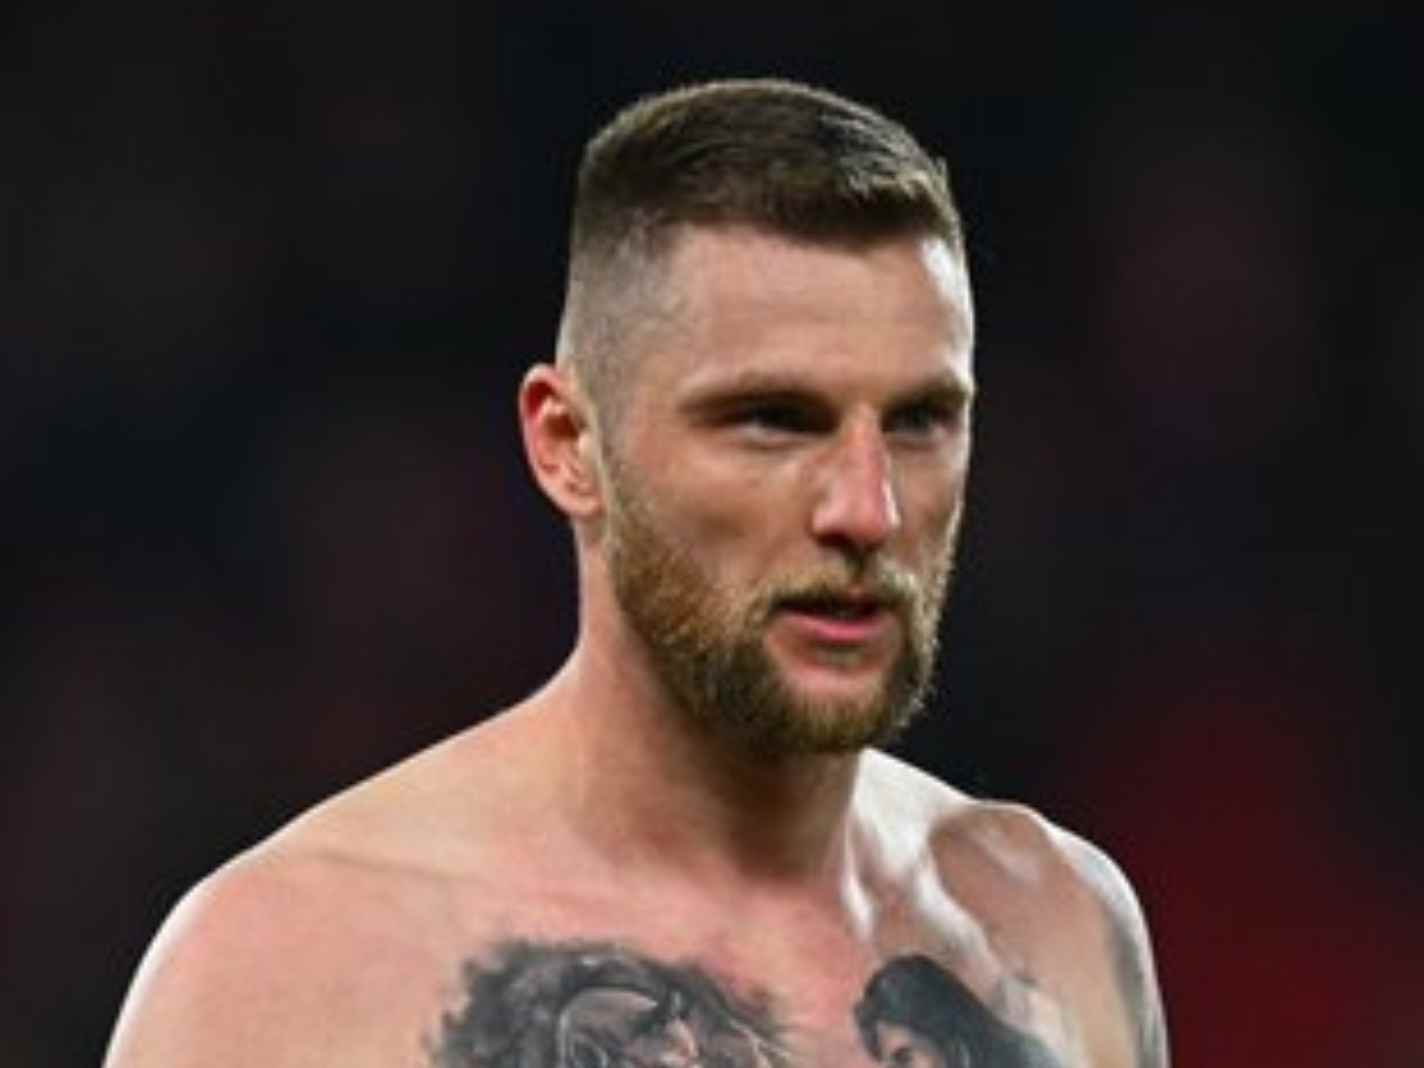 Inter Milan's Skriniar with most outrageous chest tattoo